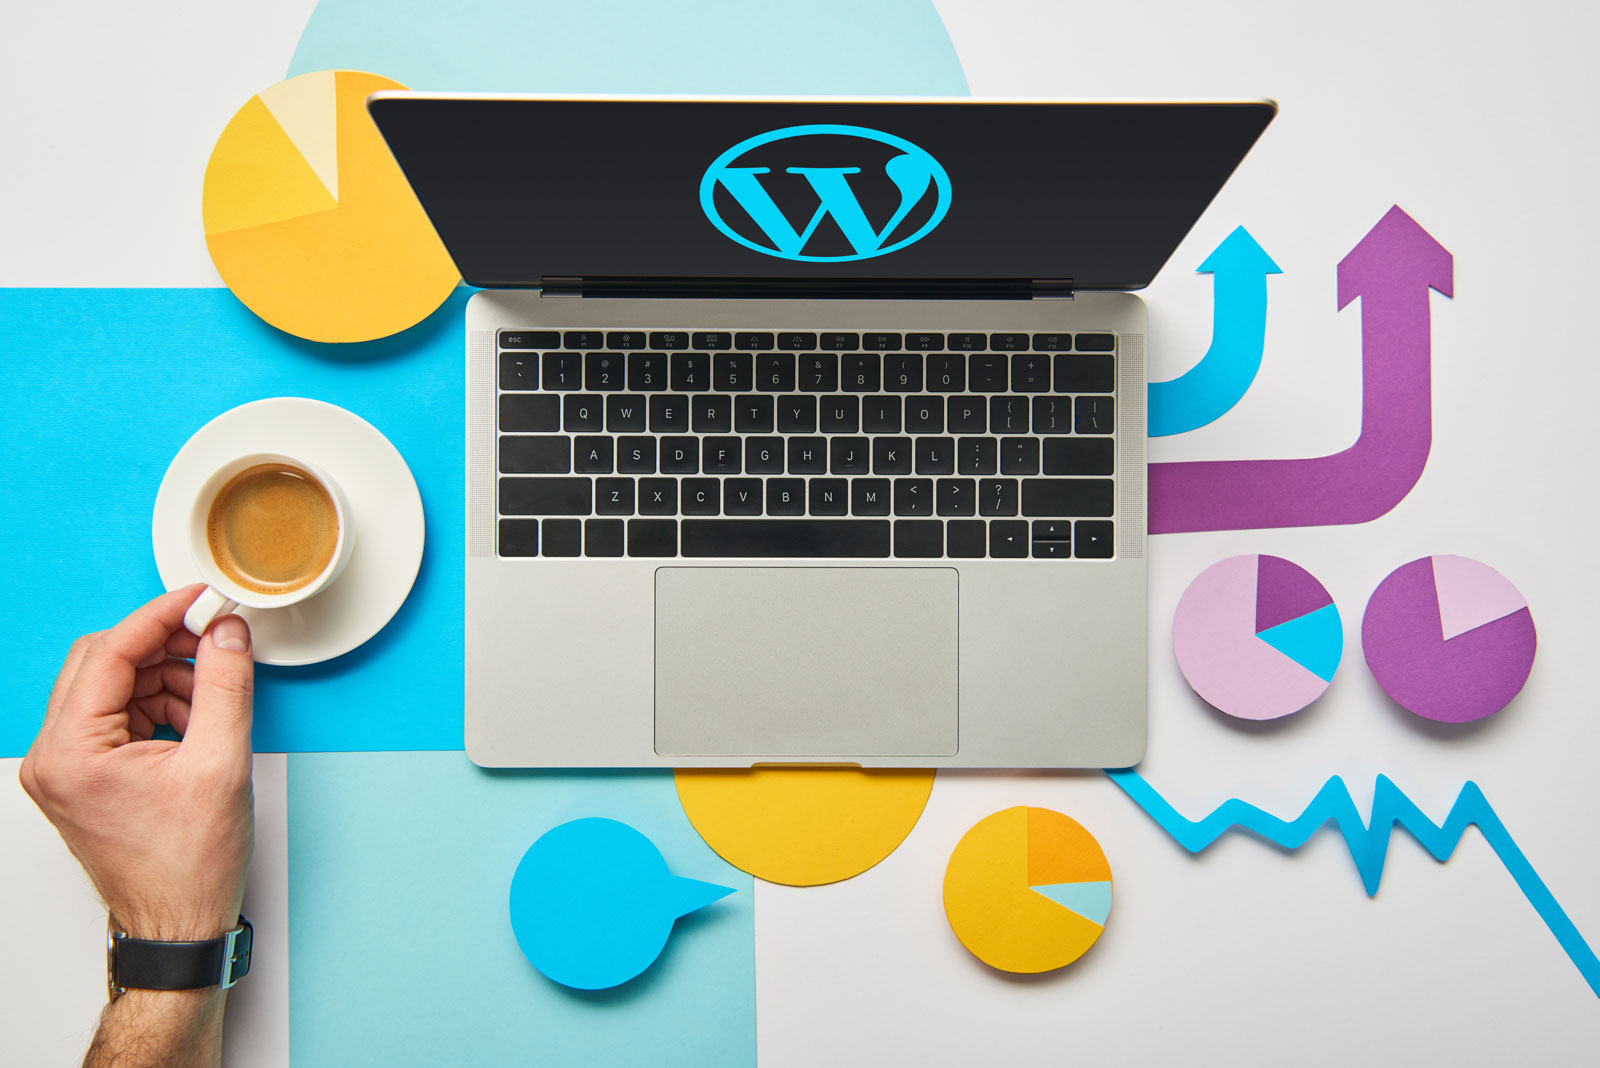 A MacBook Pro with a WordPress logo surrounded by graphs for decoration.